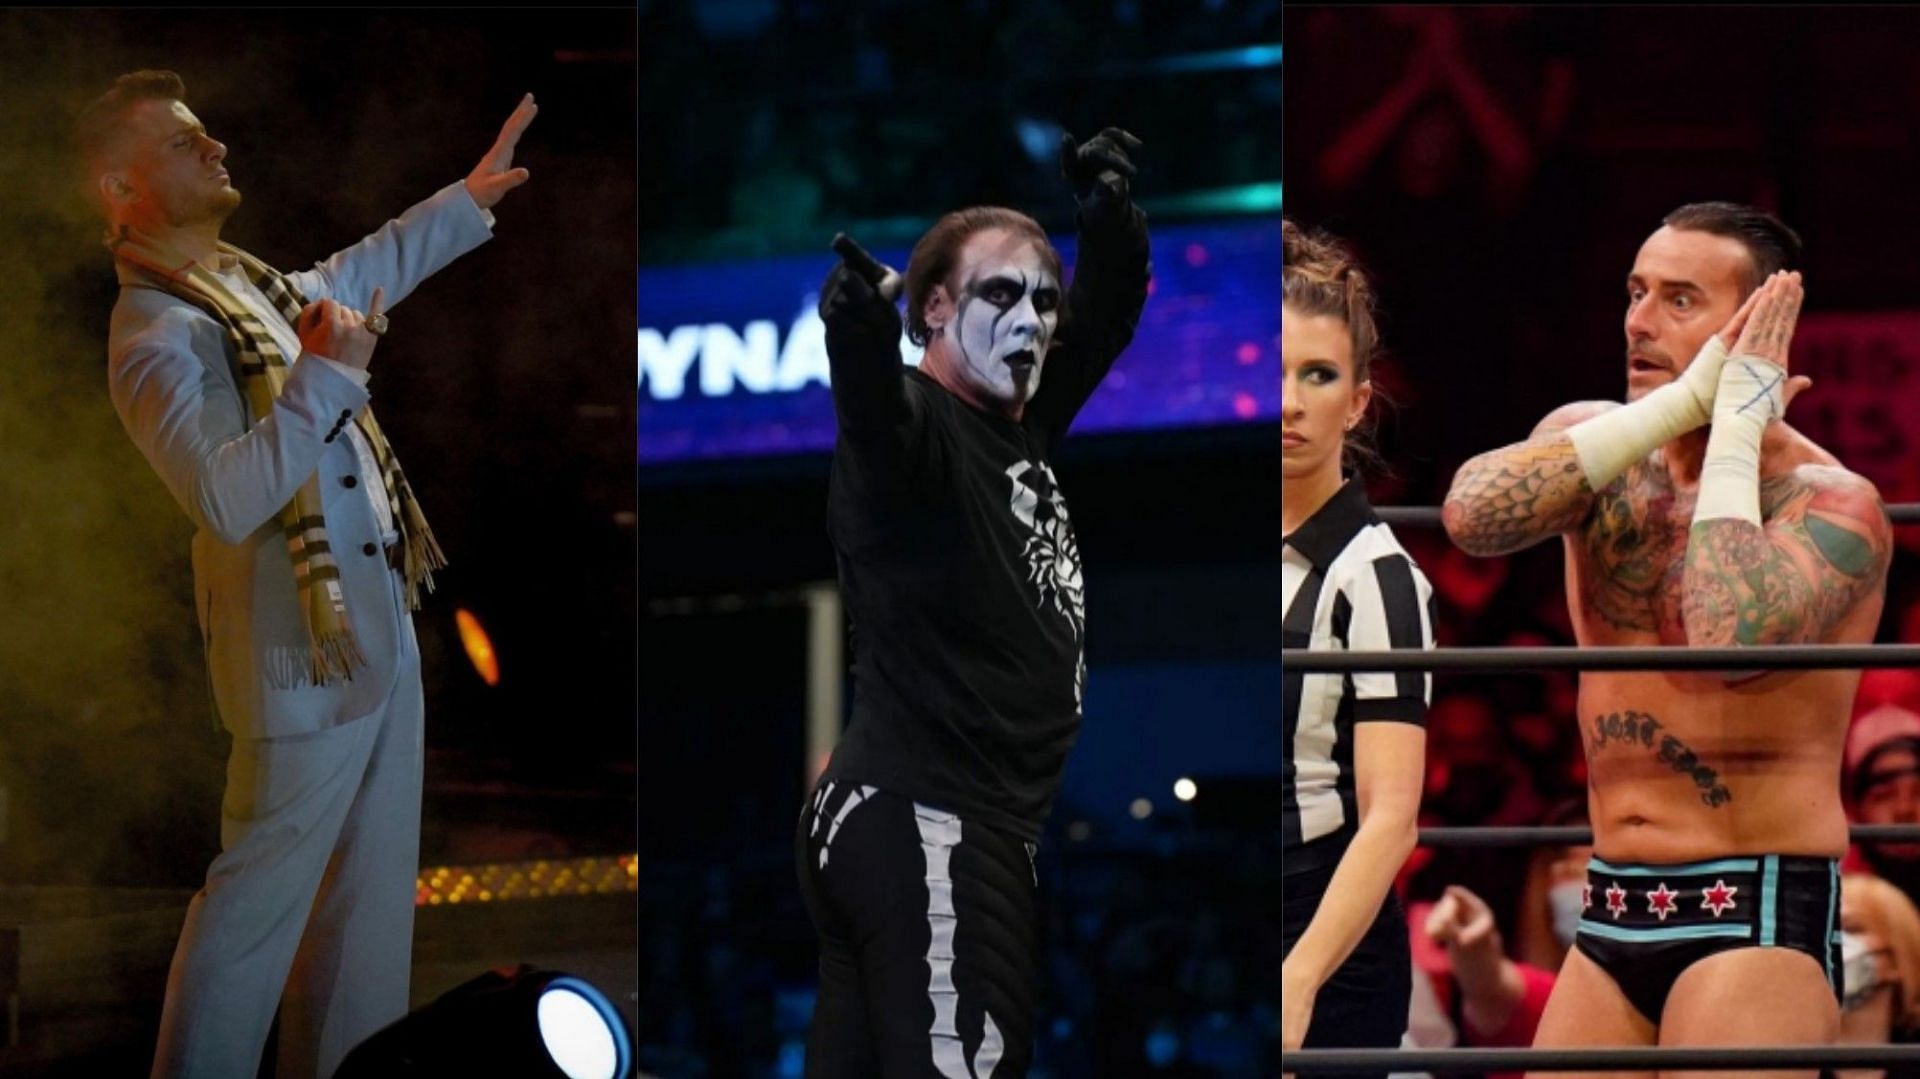 What can we expect from AEW Dynamite this week?